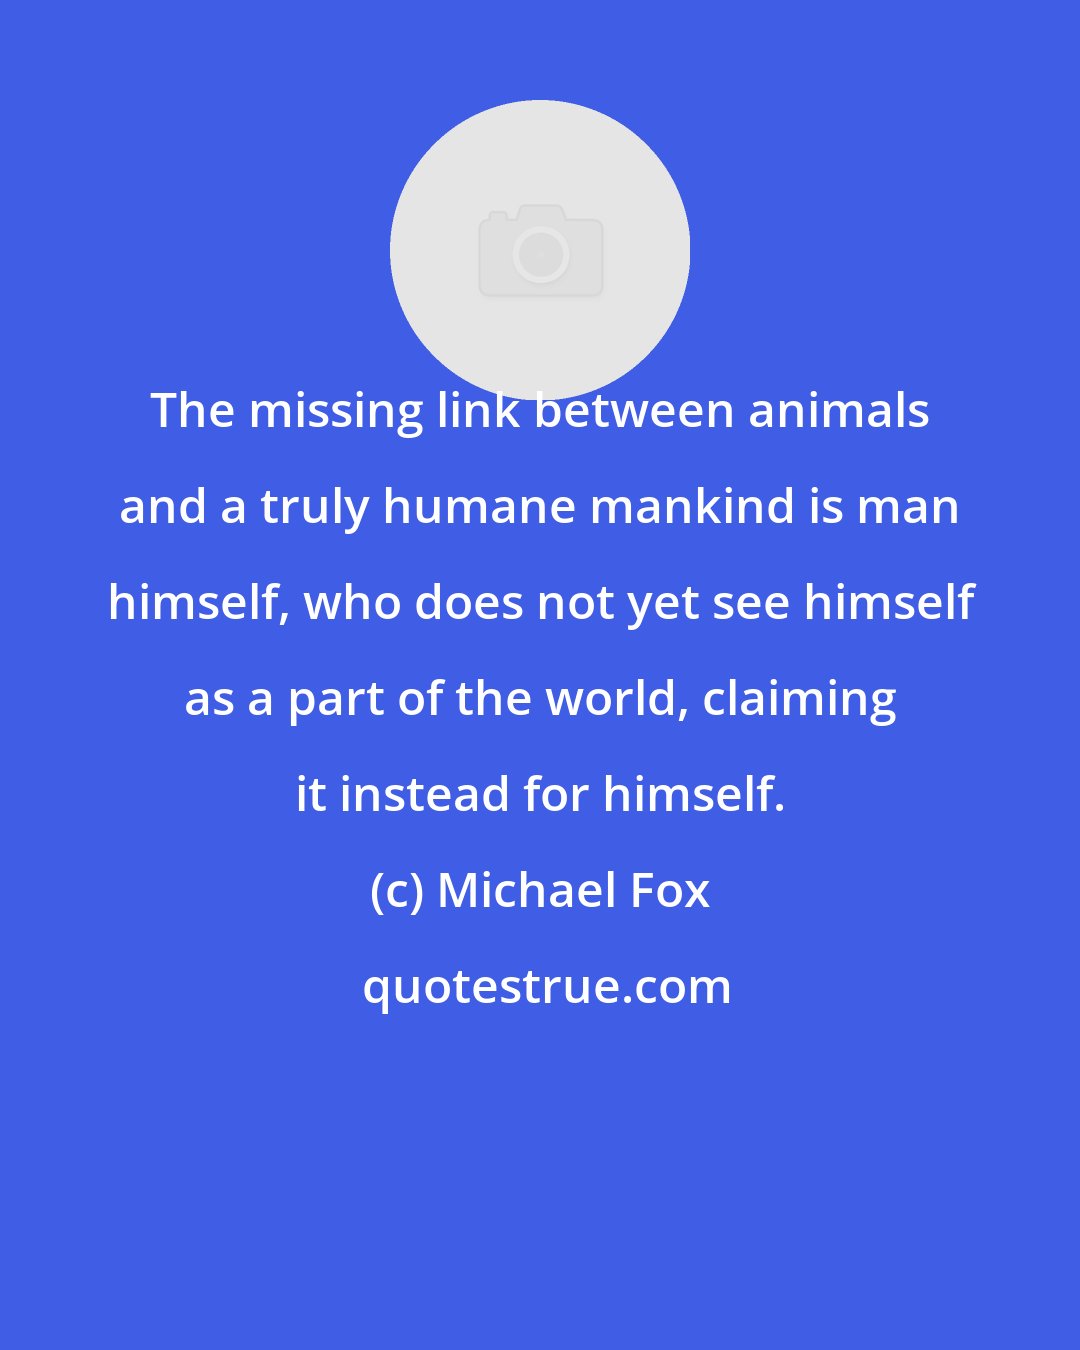 Michael Fox: The missing link between animals and a truly humane mankind is man himself, who does not yet see himself as a part of the world, claiming it instead for himself.